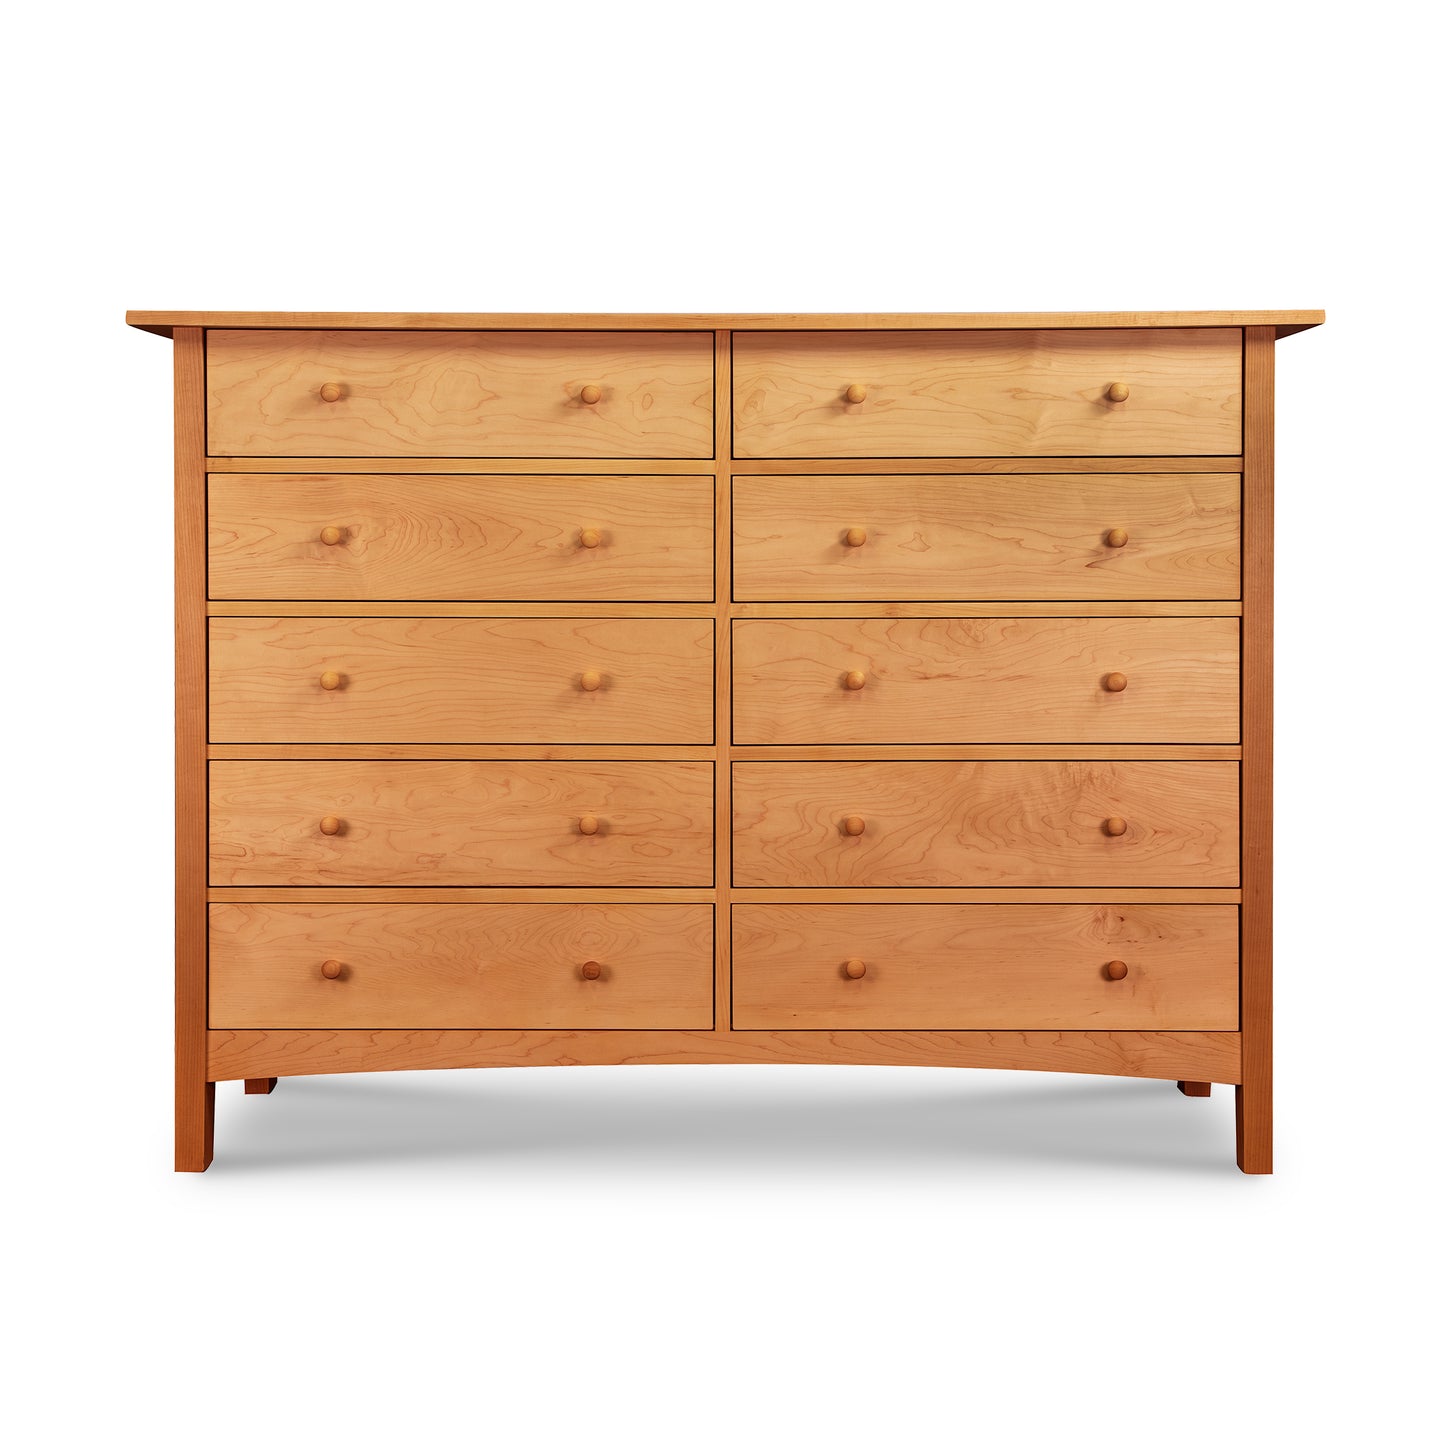 A solid wood Vermont Furniture Designs Burlington Shaker 10-Drawer Dresser with round knobs against a plain background.